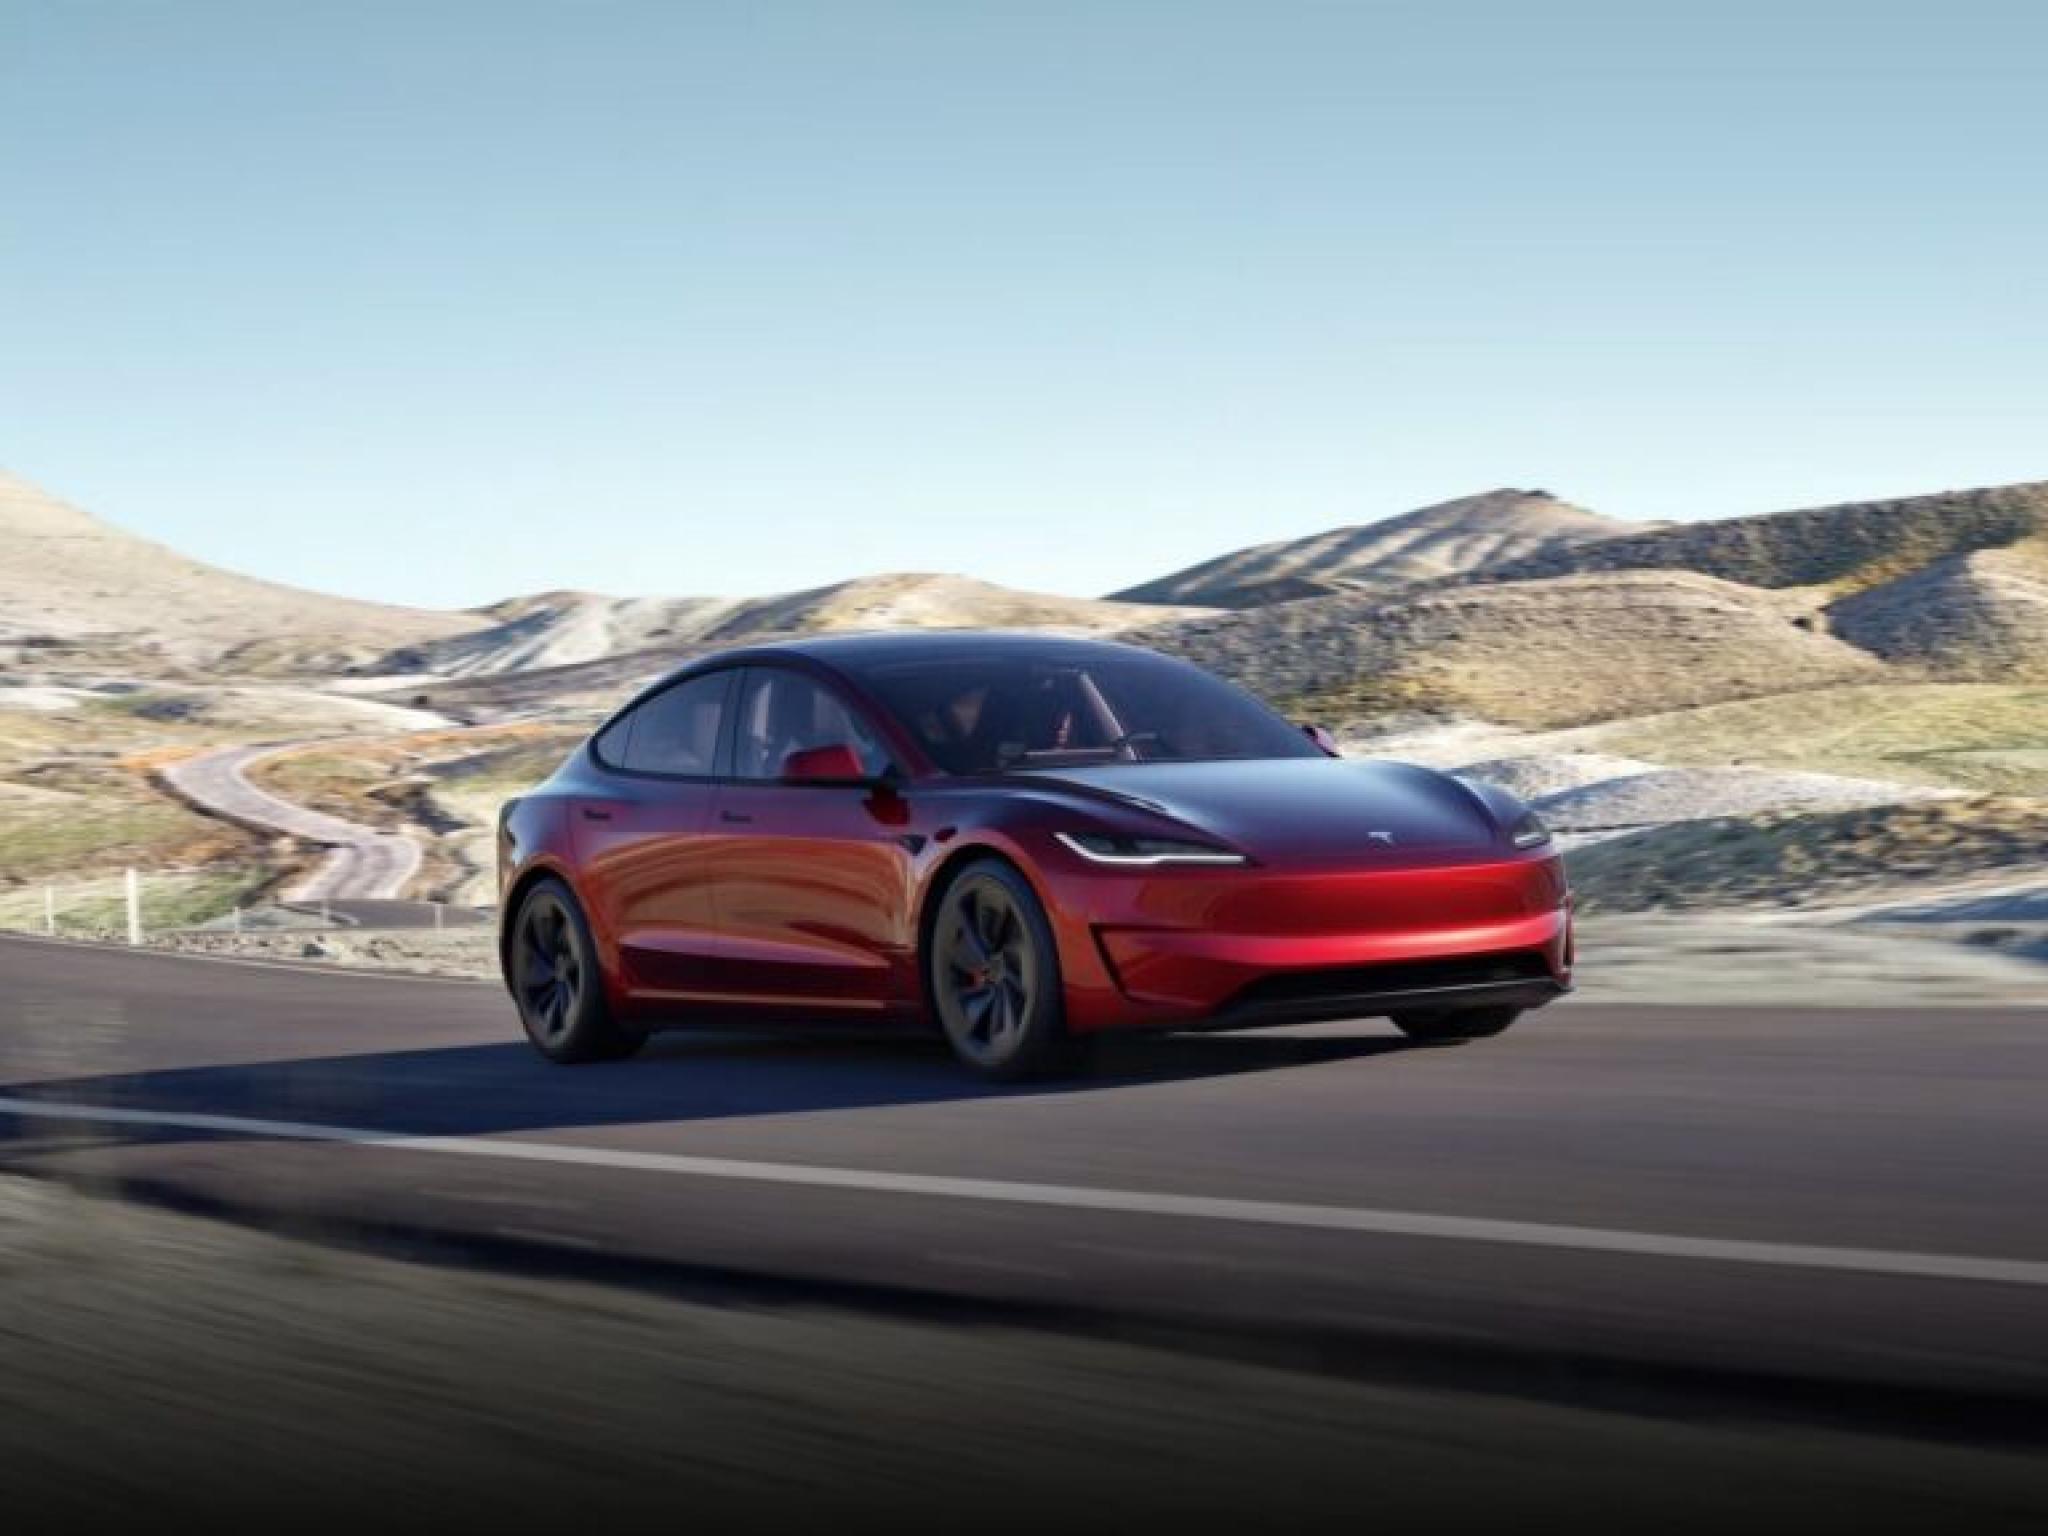  former-tesla-executive-martin-viecha-drives-home-absurdly-fast-model-3-performance-with-fsd-after-considering-rival-ev-models-premium-sedan-thats-porsche-fast 